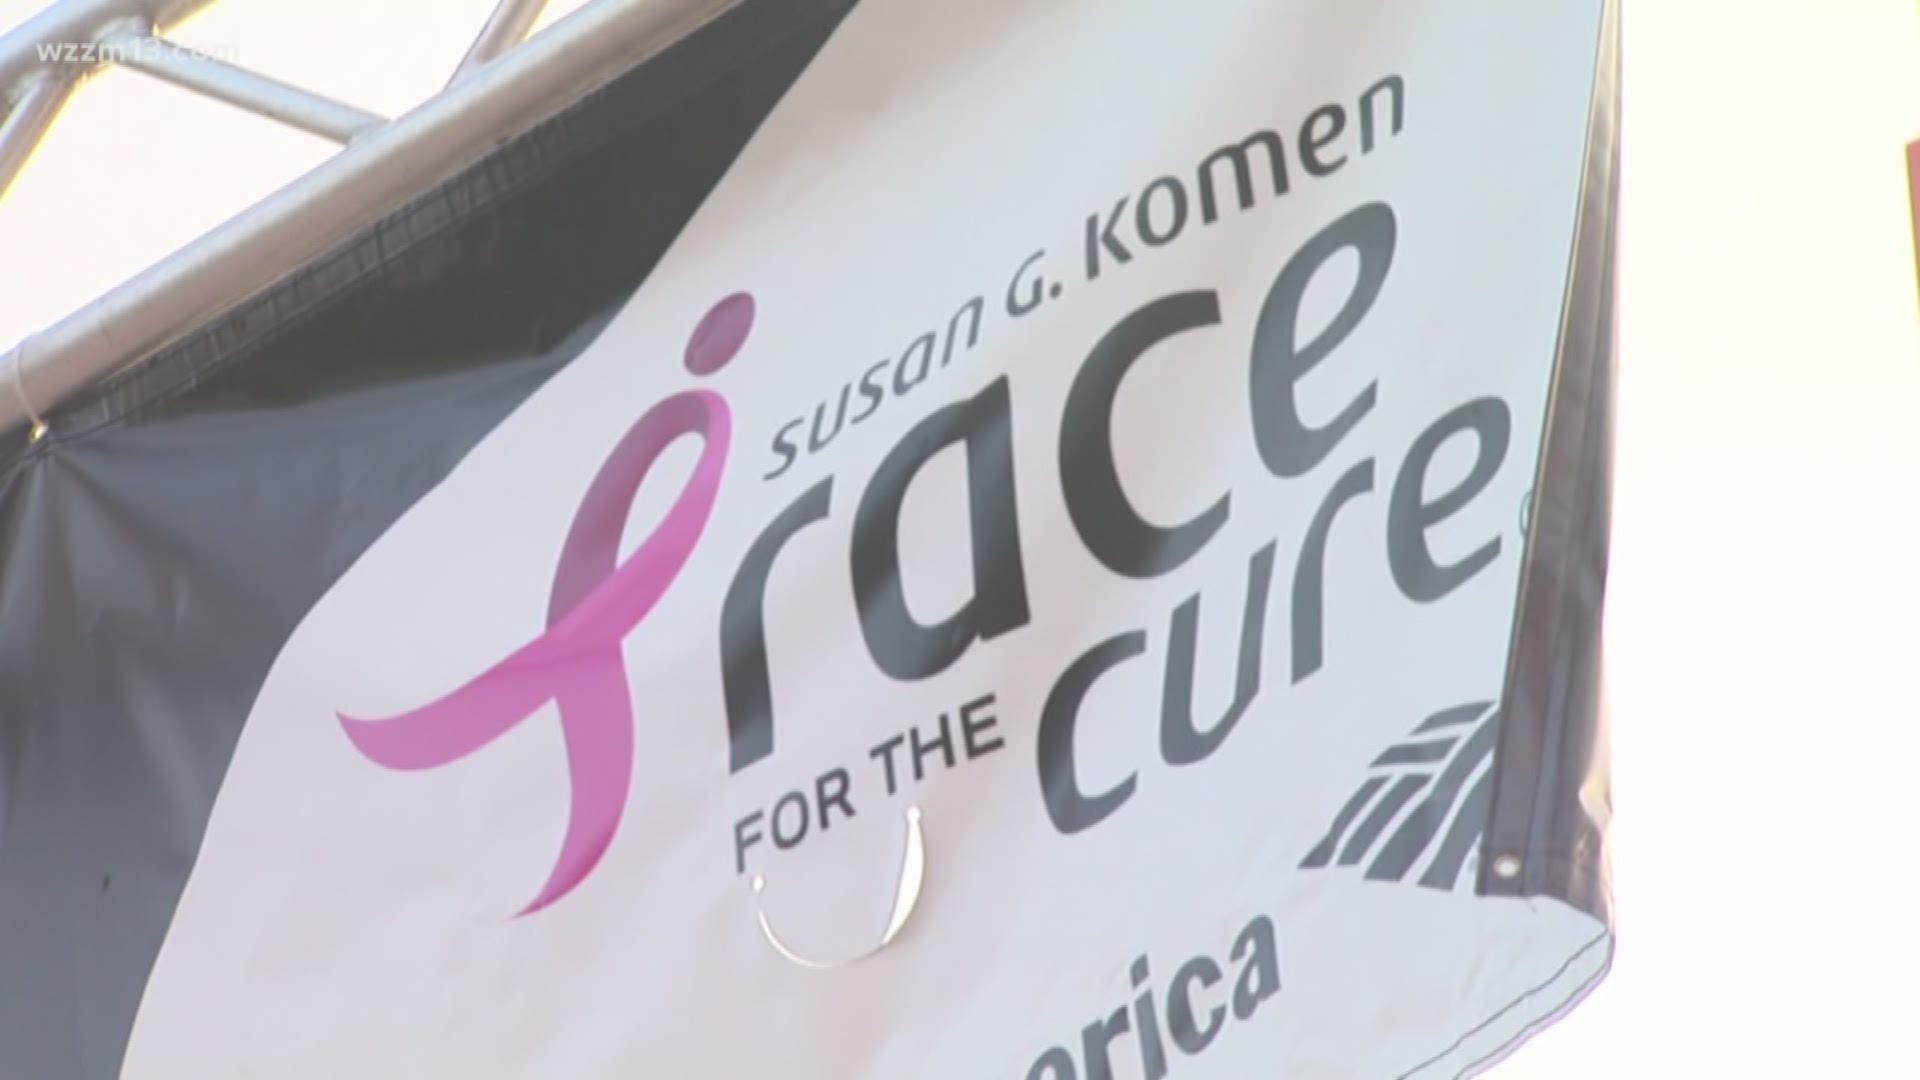 Komen Race for the Cure